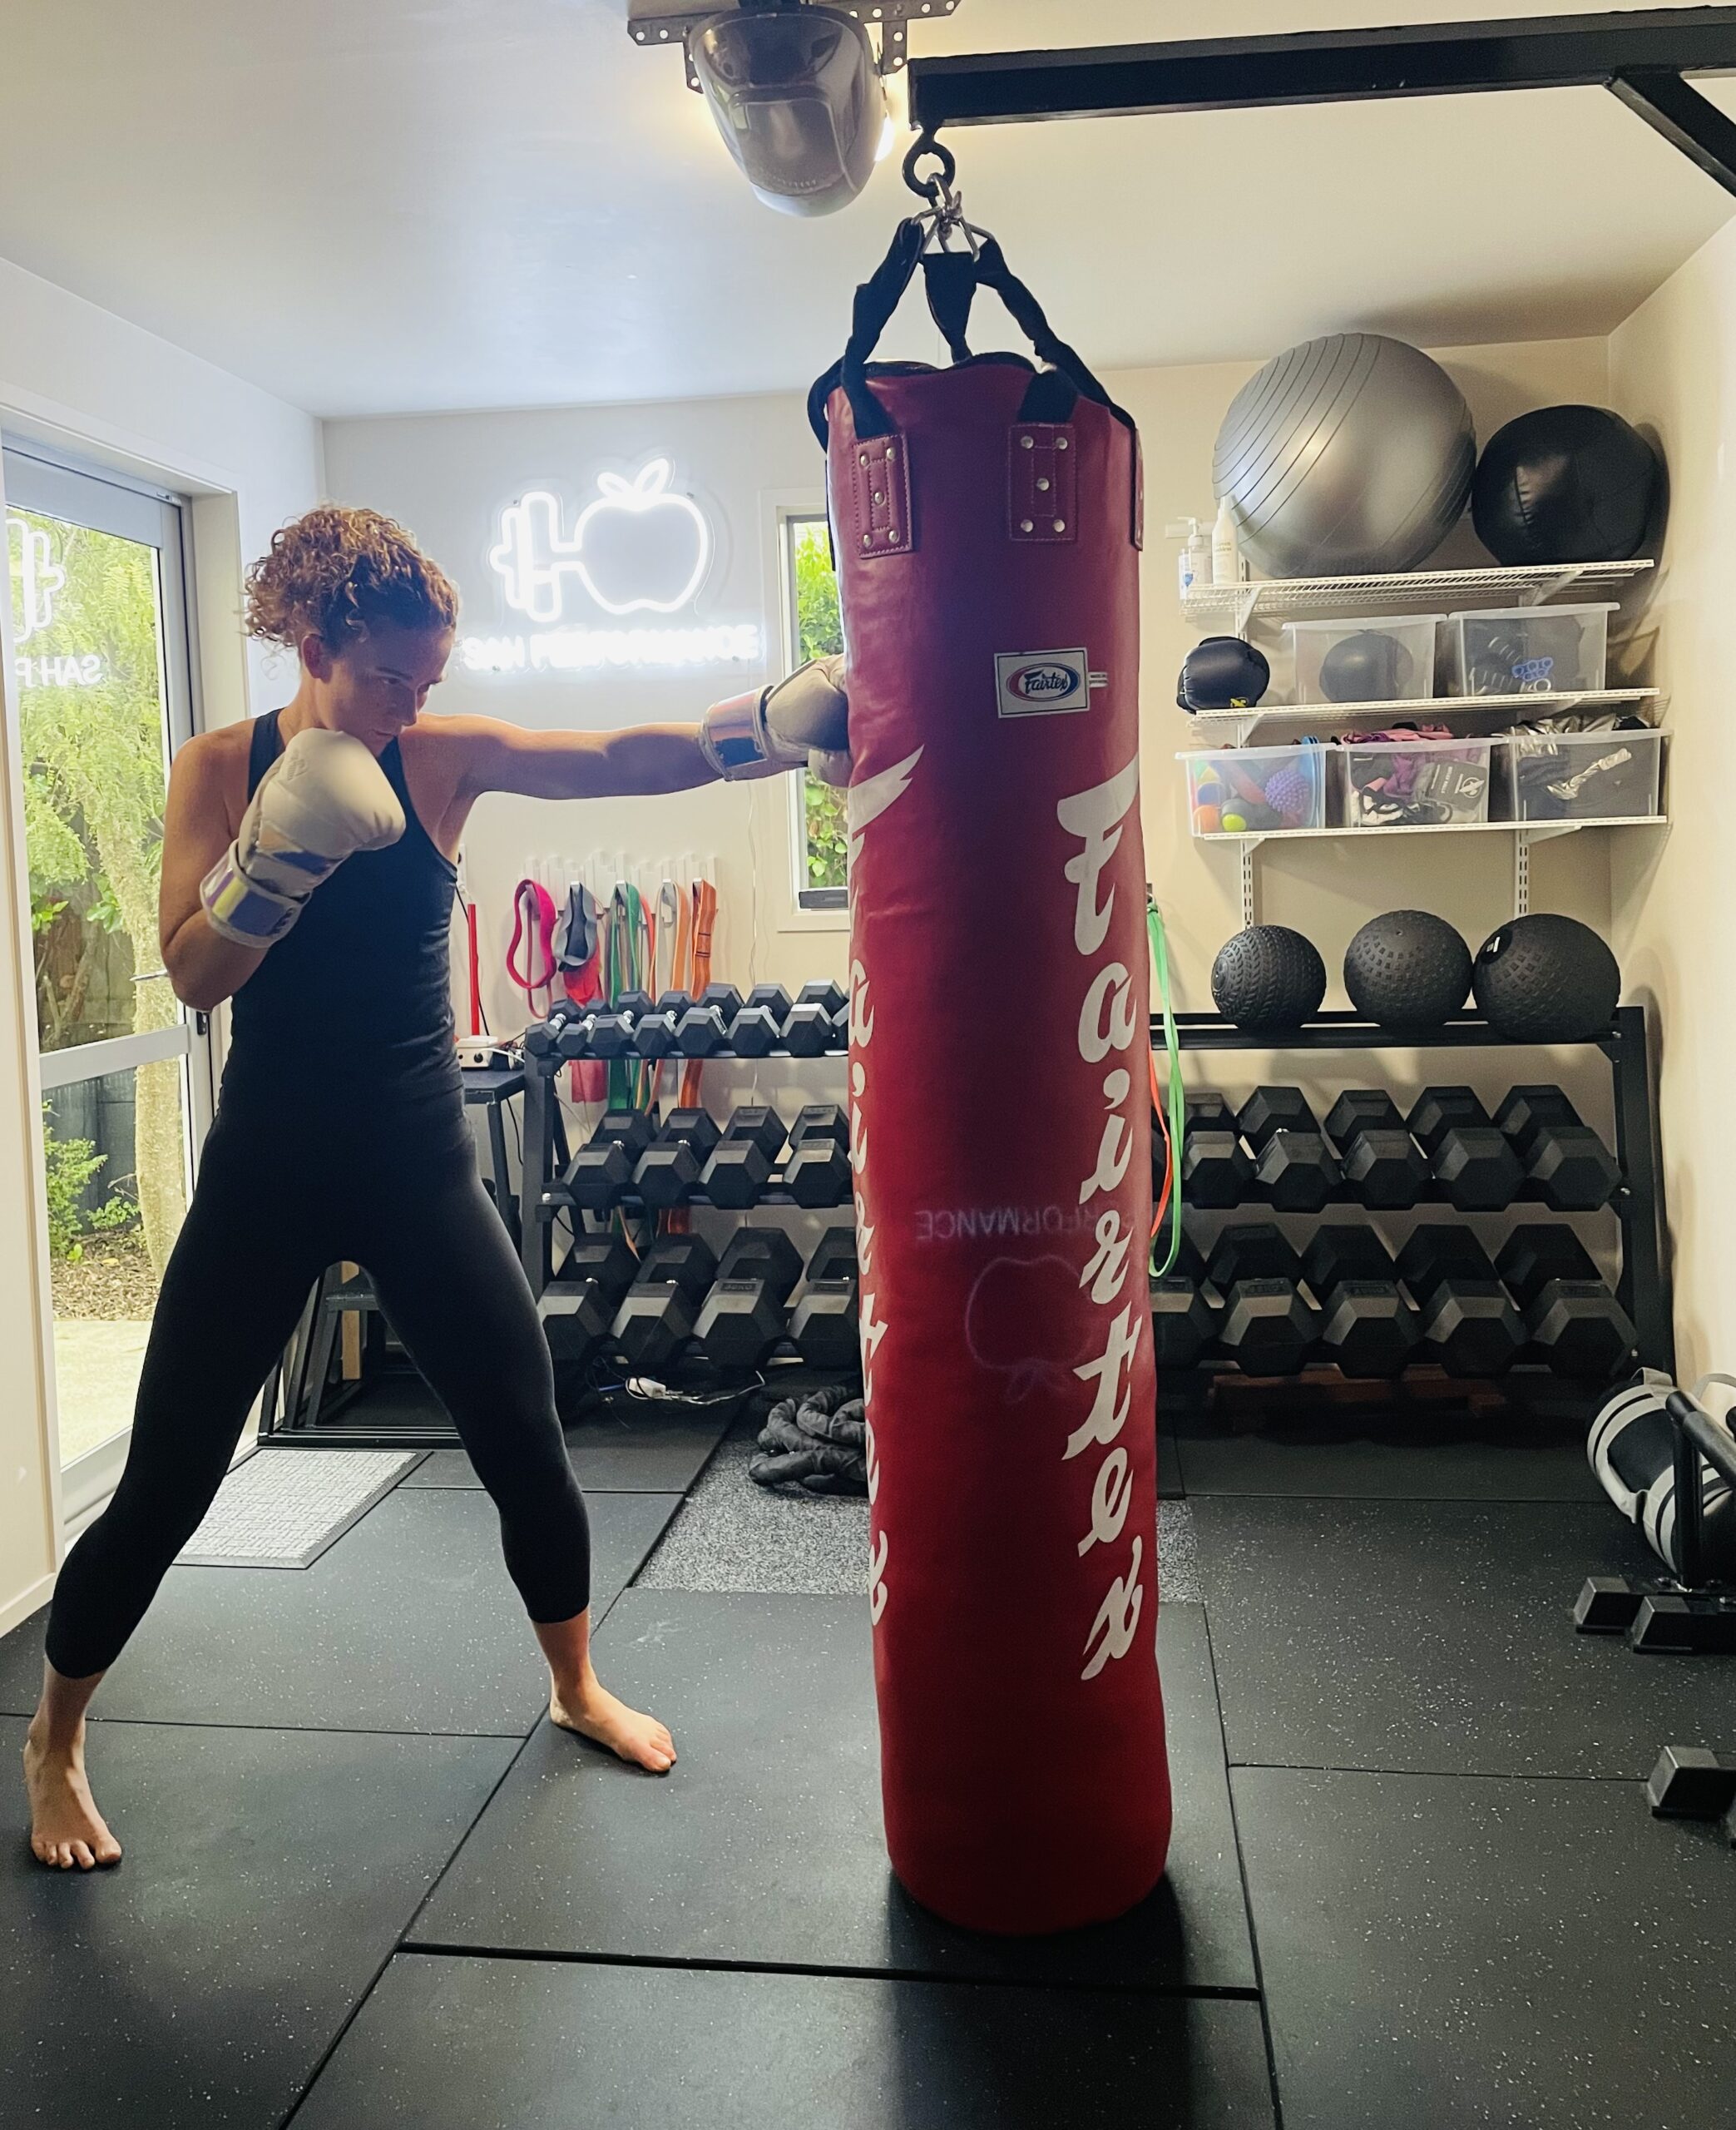 Wellington Personal Trainer Sarah Holliday Certified Personal Trainer. Wellington’s best for guiding you on your fitness and weight loss journey.